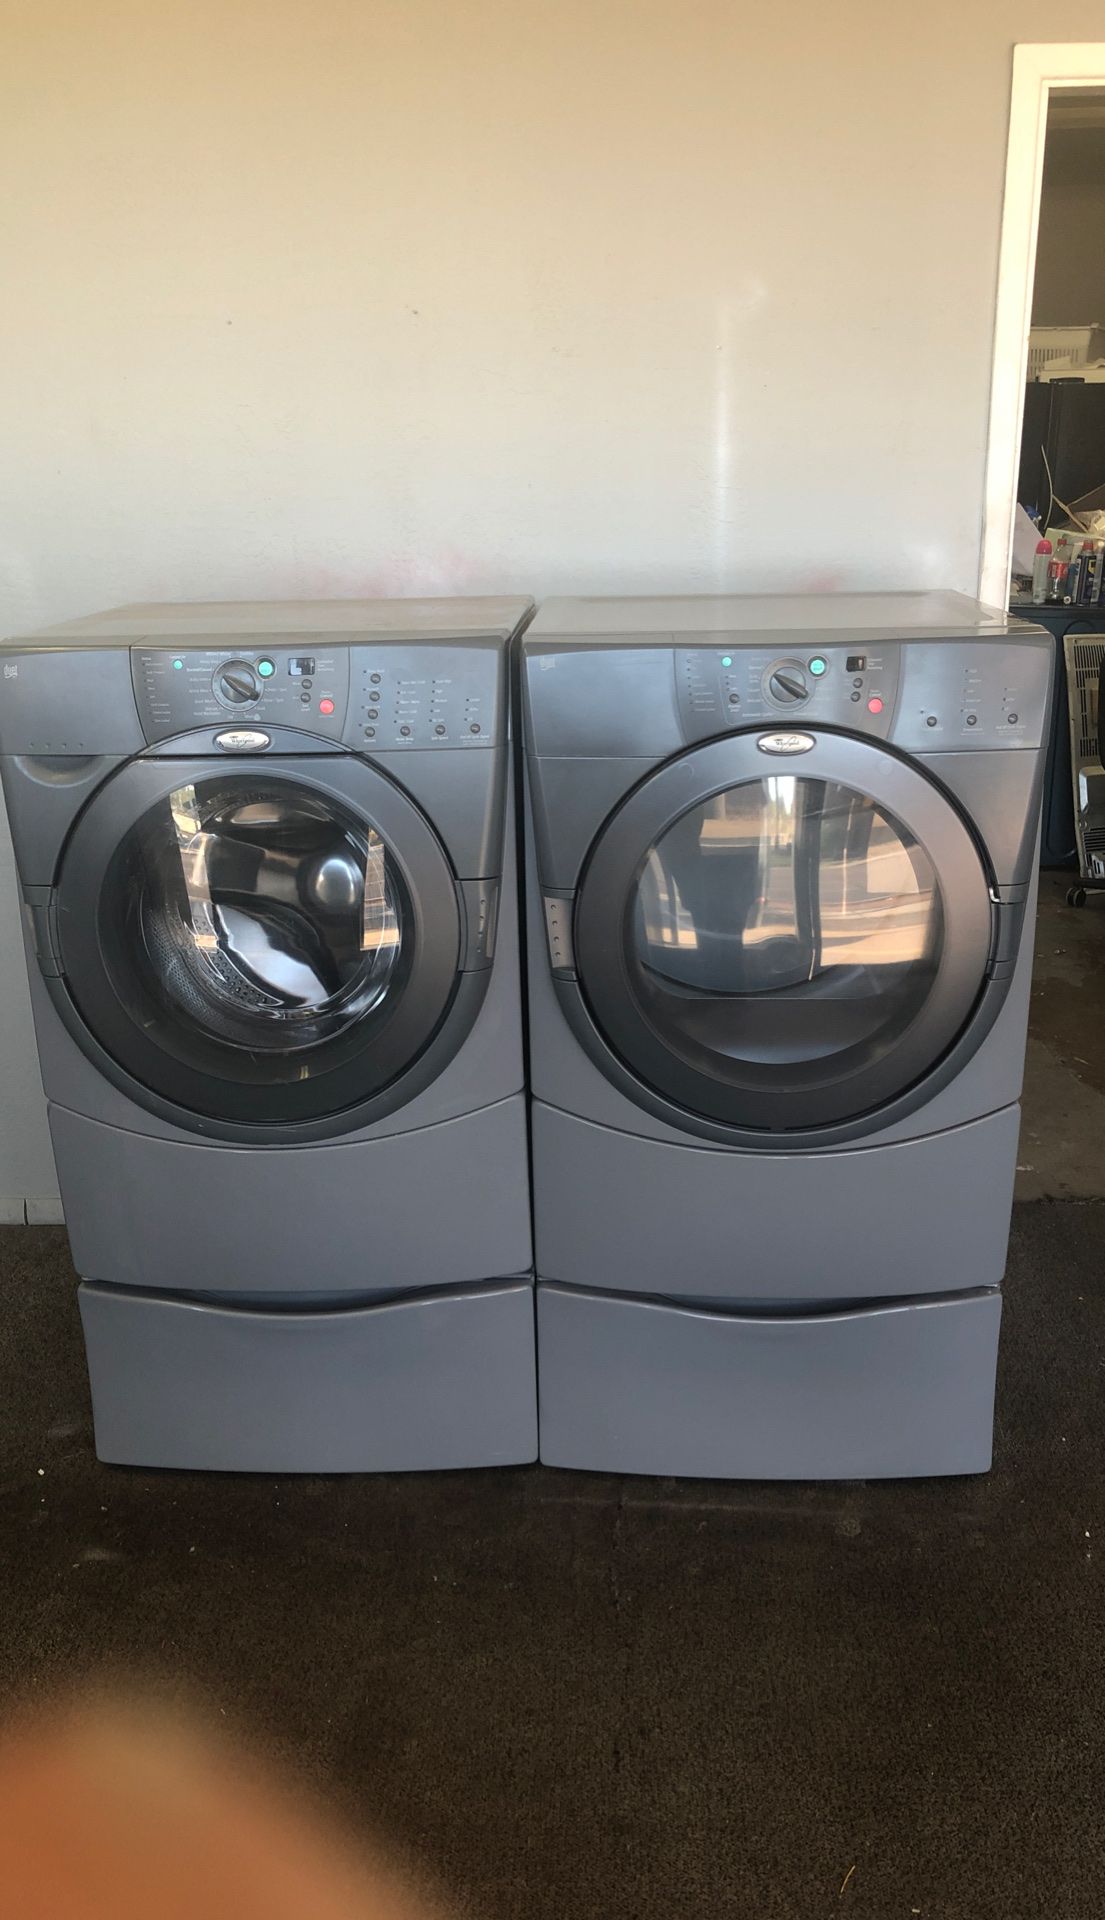 Whirlpool duet super capacity front load washer and dryer on pedestals electric